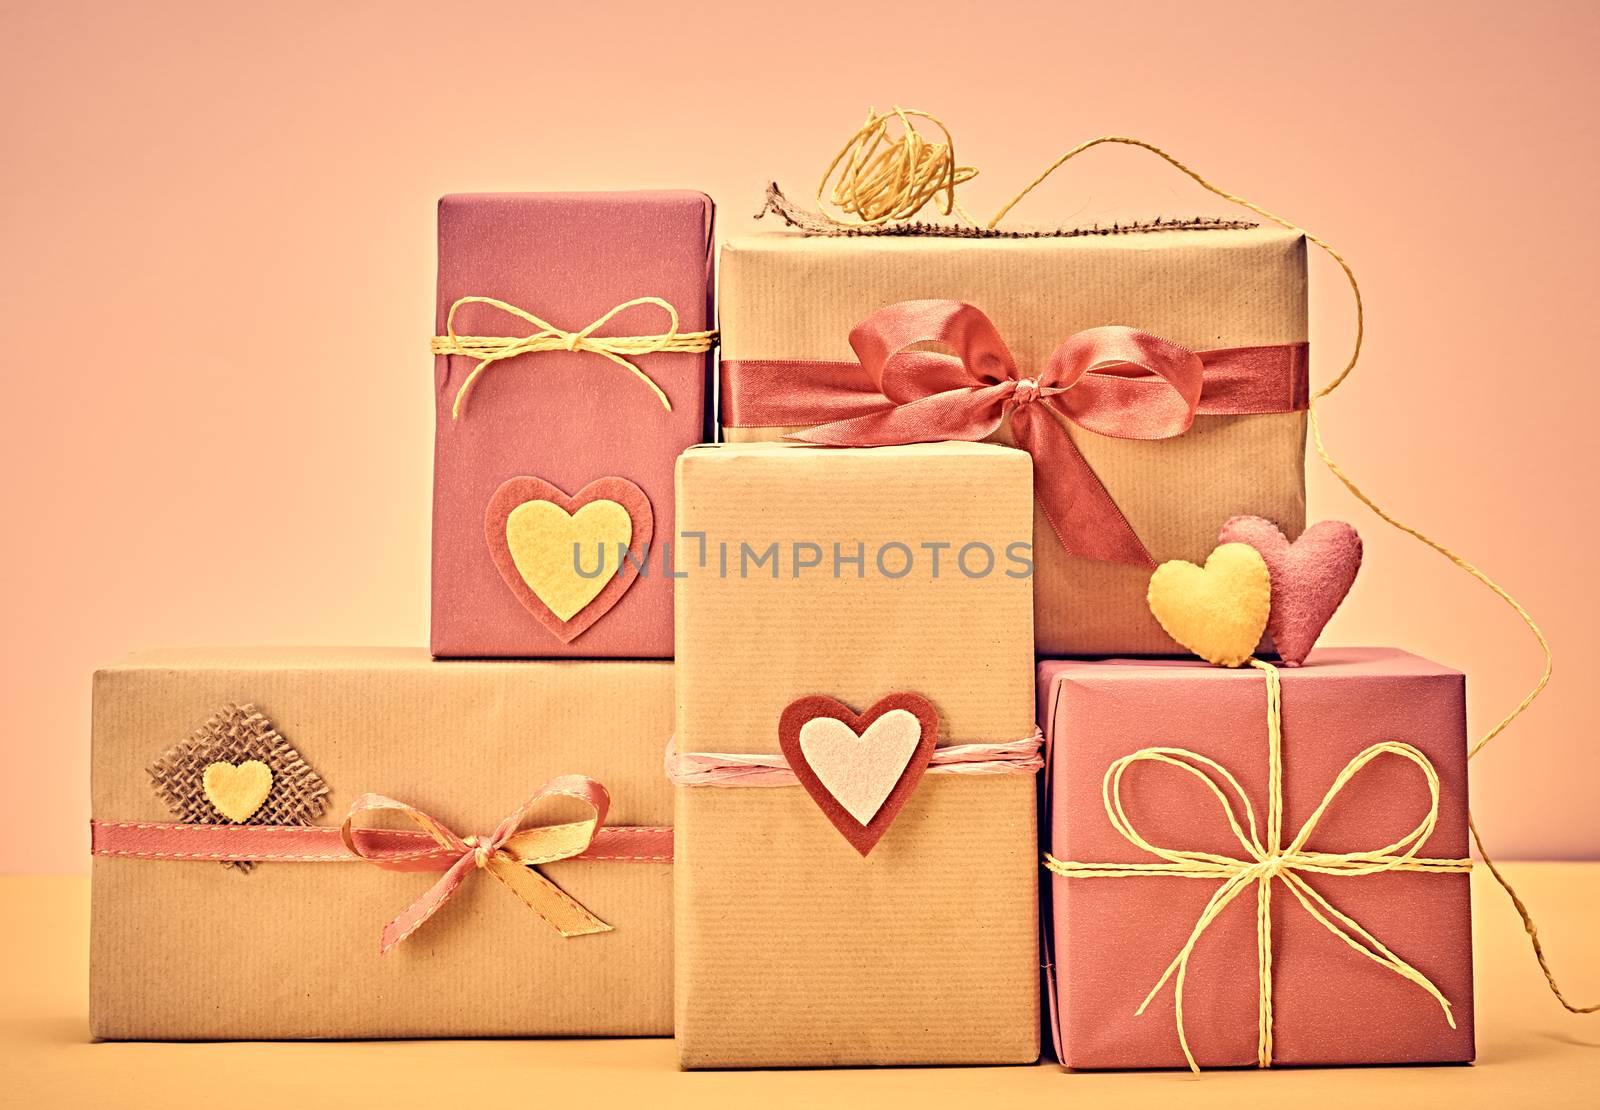 Love hearts, Valentines Day. Handcraft gift boxes, presents stack. Couple of hearts. Retro romantic styled. Vintage retro concept, unusual greeting card. Kraft paper, multicolored felt, copyspase